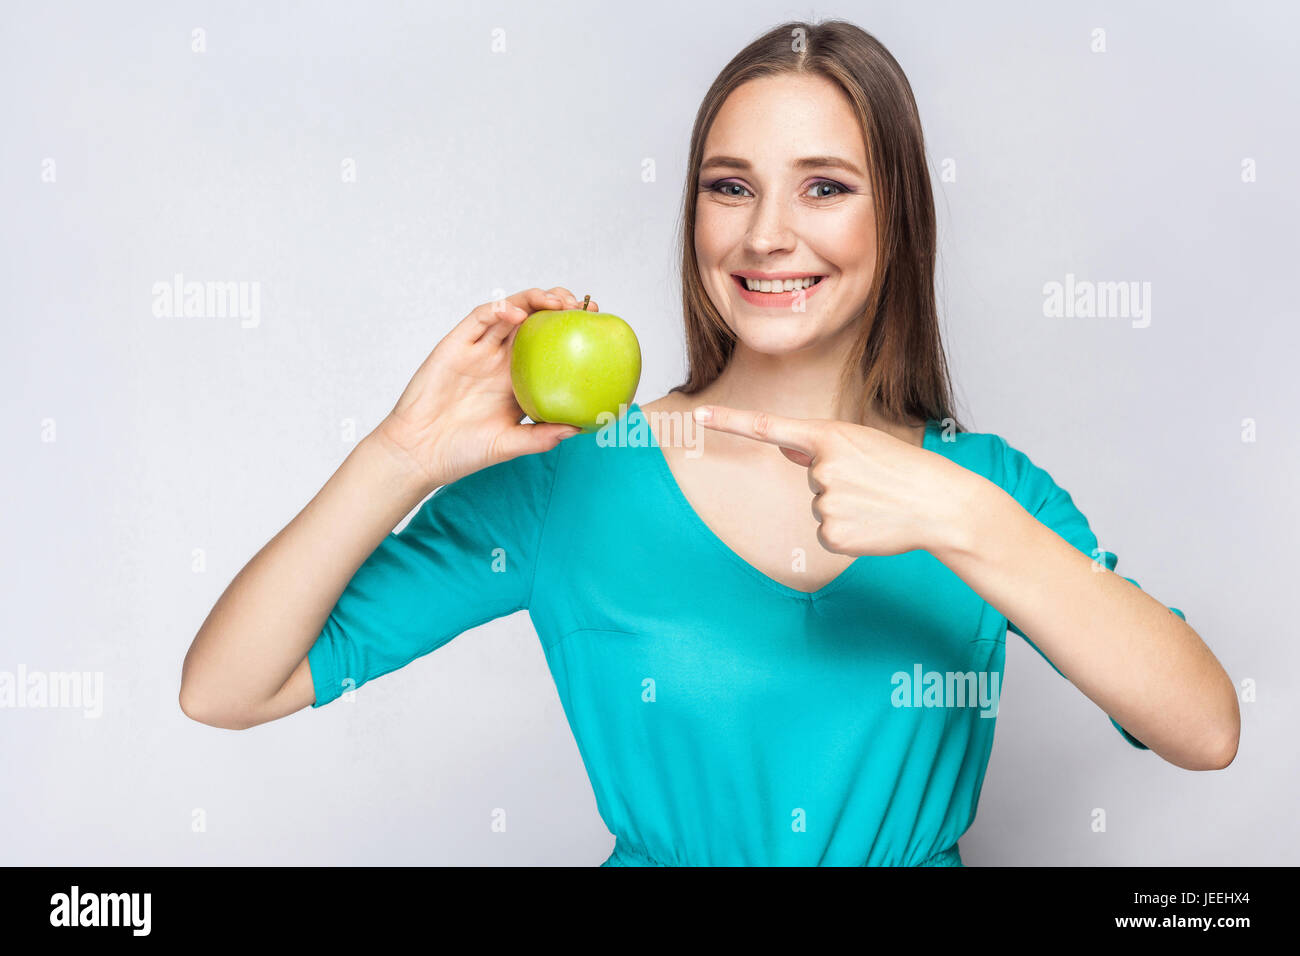 Young beautiful woman with freckles and green dress holding apple and pointing with finger. studio shot, isolated on light gray background. Stock Photo